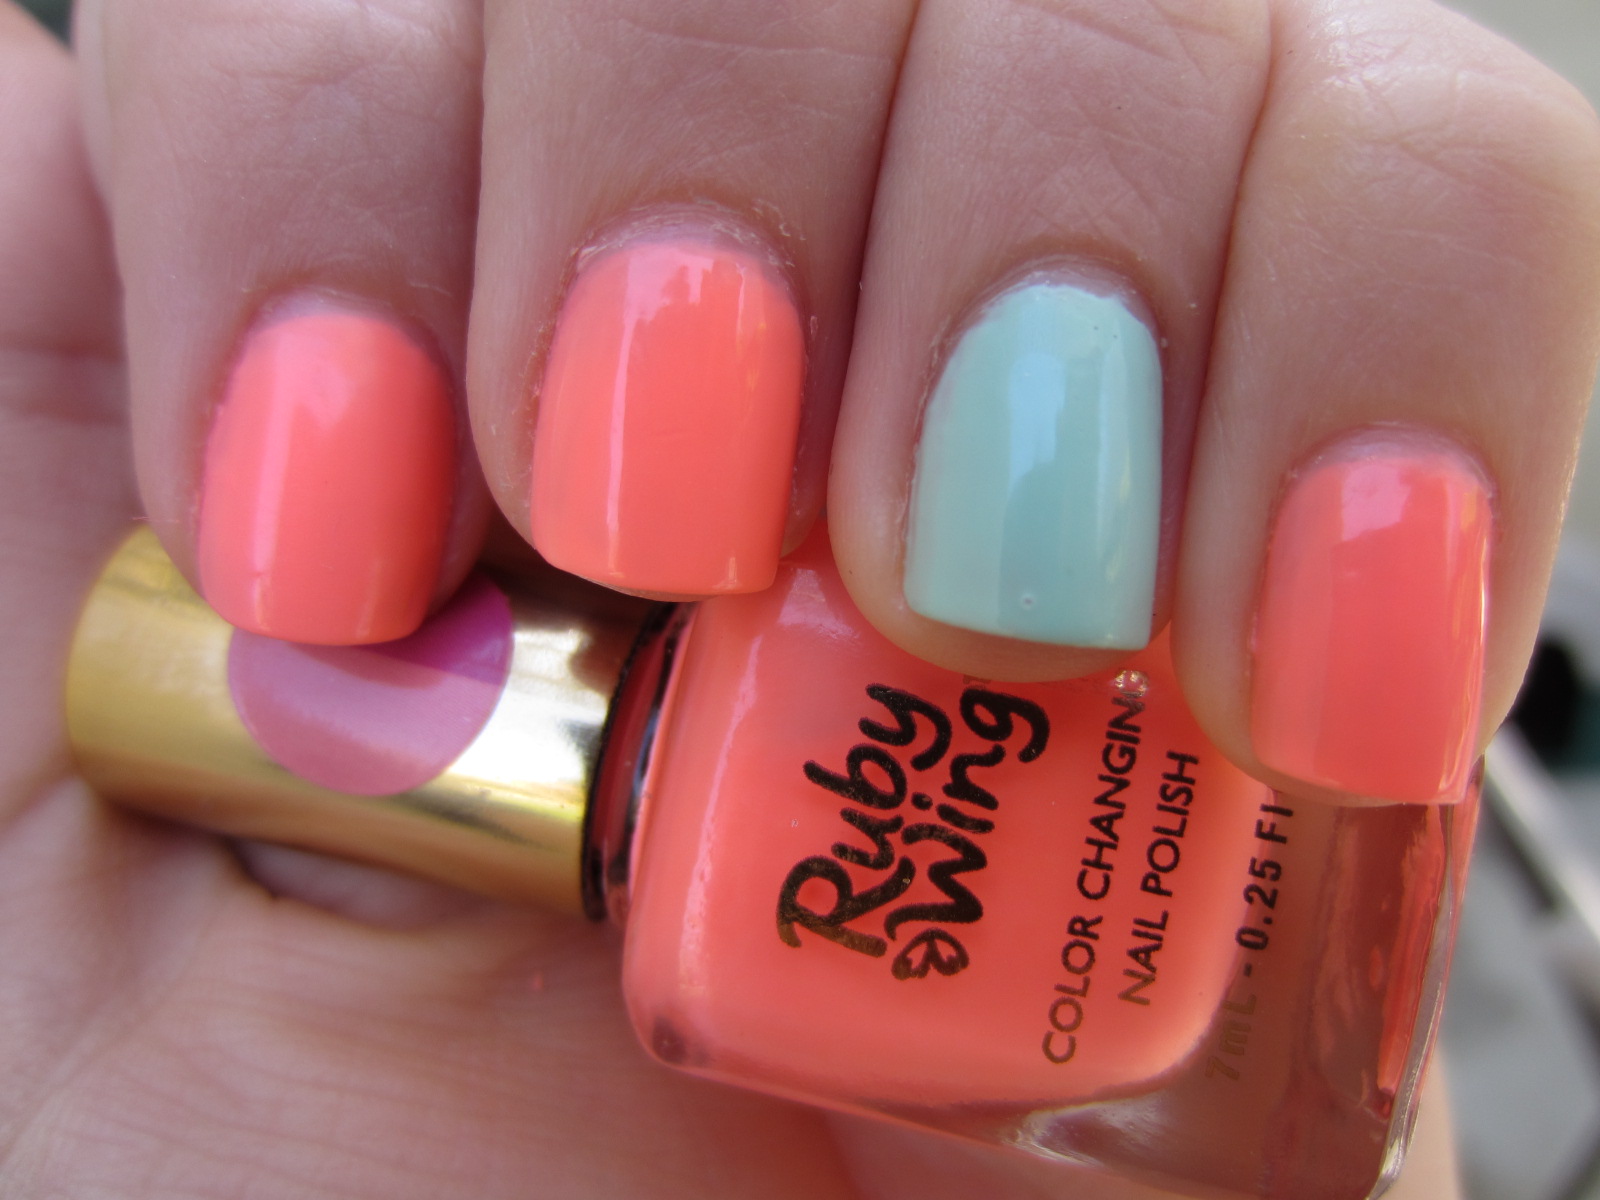 3. Ruby Wing Color Changing Nail Polish - wide 2